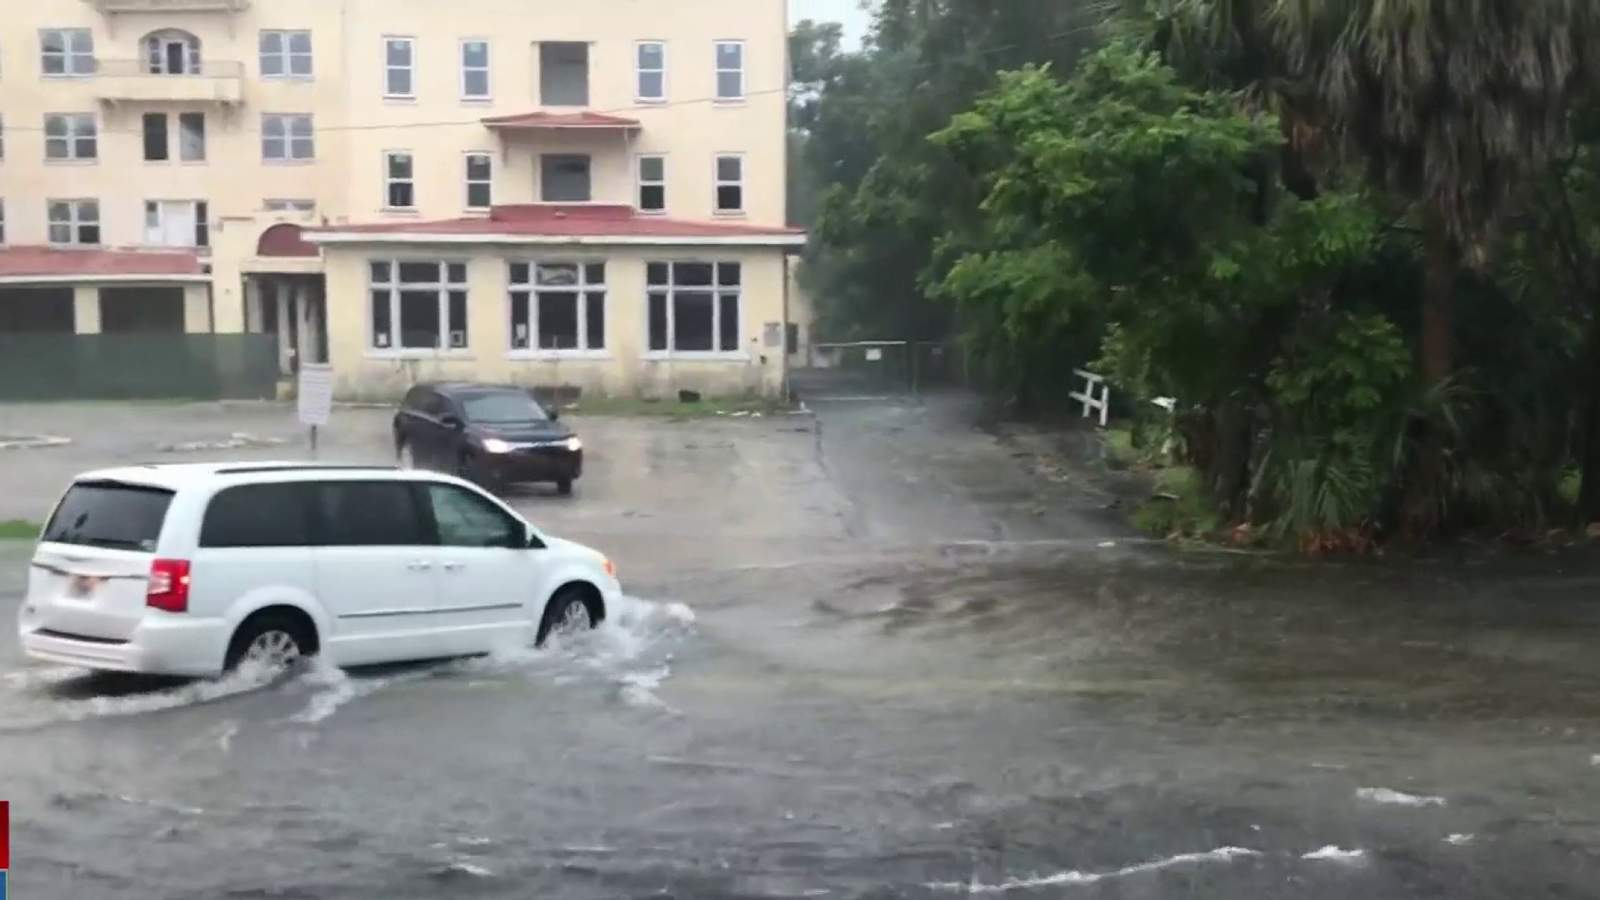 Waterlogged roads in Volusia County close as Eta expected threaten more flooding prone areas